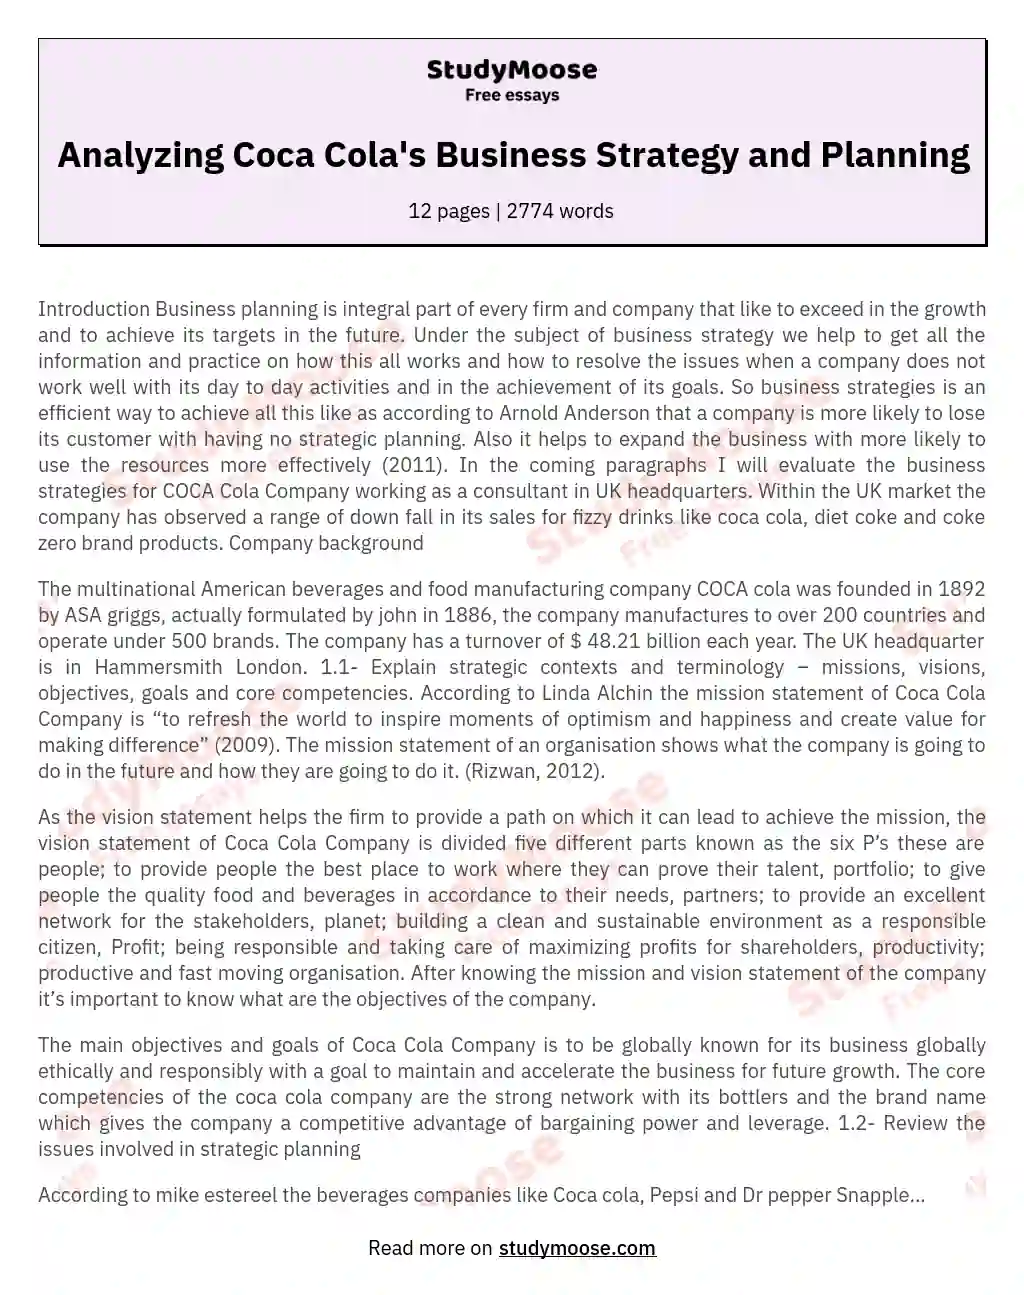 Analyzing Coca Cola's Business Strategy and Planning essay